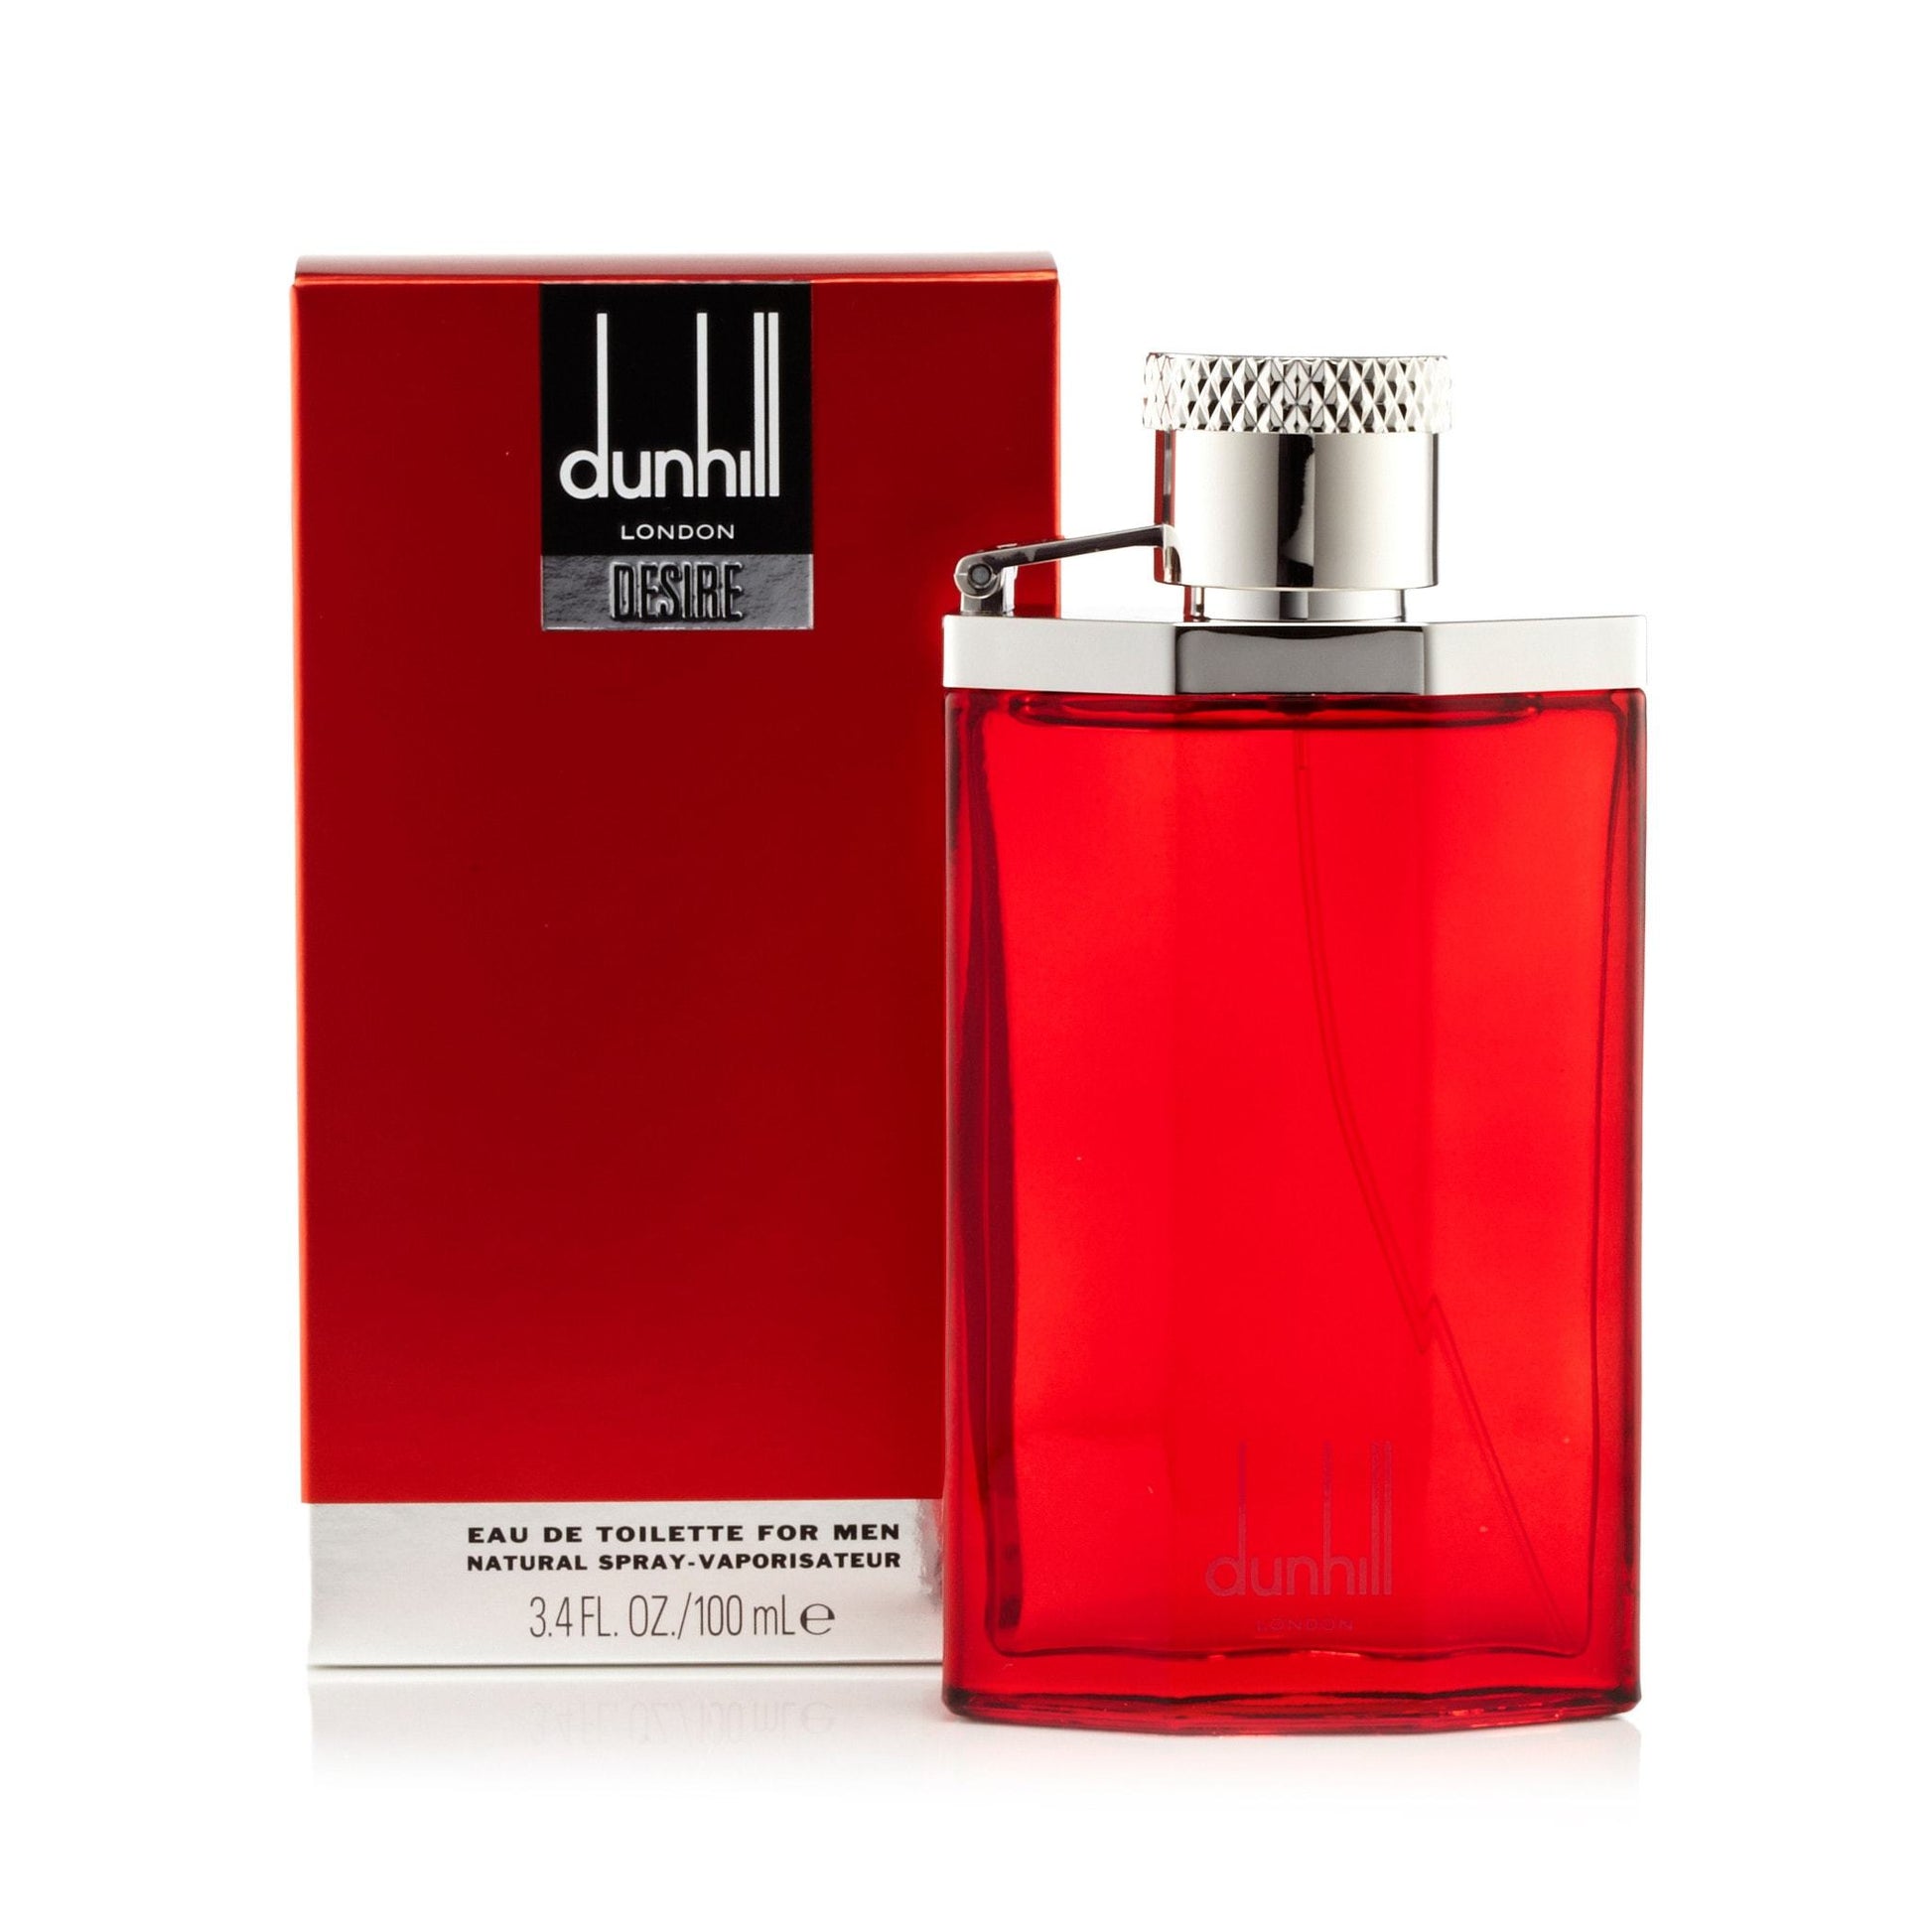 Desire Red Eau de Toilette Spray for Men by Alfred Dunhill, Product image 1